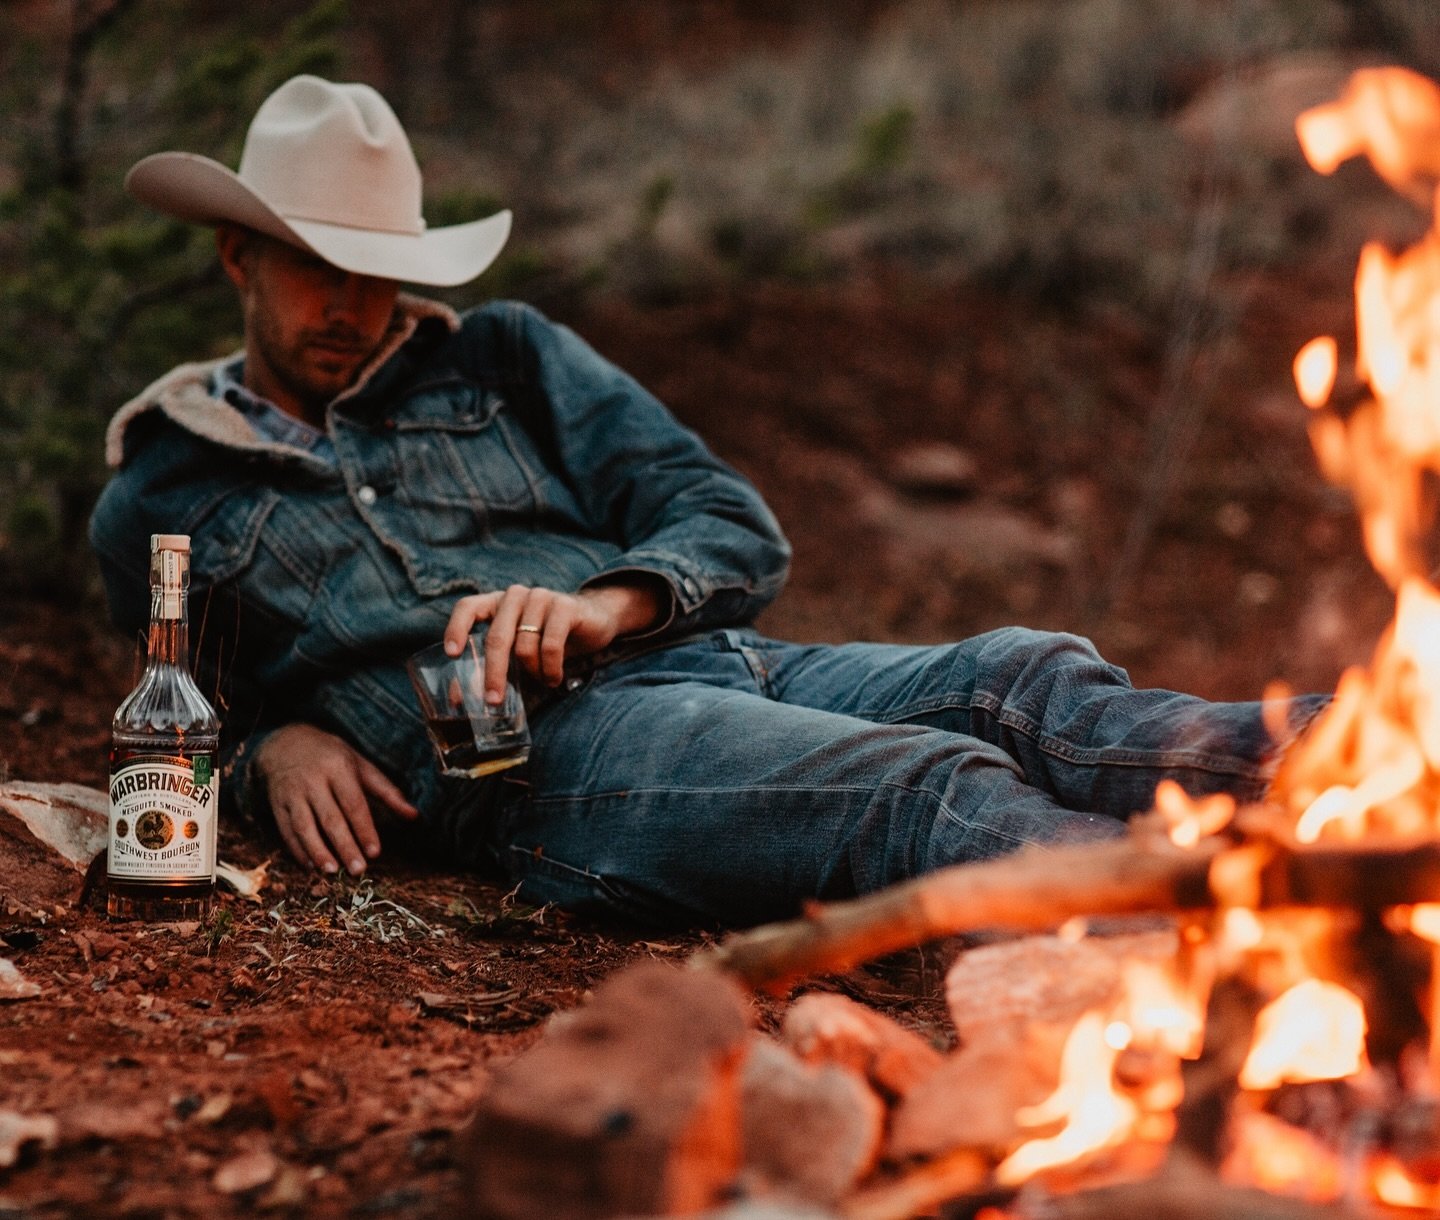 We made Warbringer because, well, somewhere along the way bourbon got soft. 
Daring was discontinued.

Its time to ruffle some feathers

#warbringerbourbon #bourbon #caskstrength #whiskey #cowboy #western #outdoors #camping